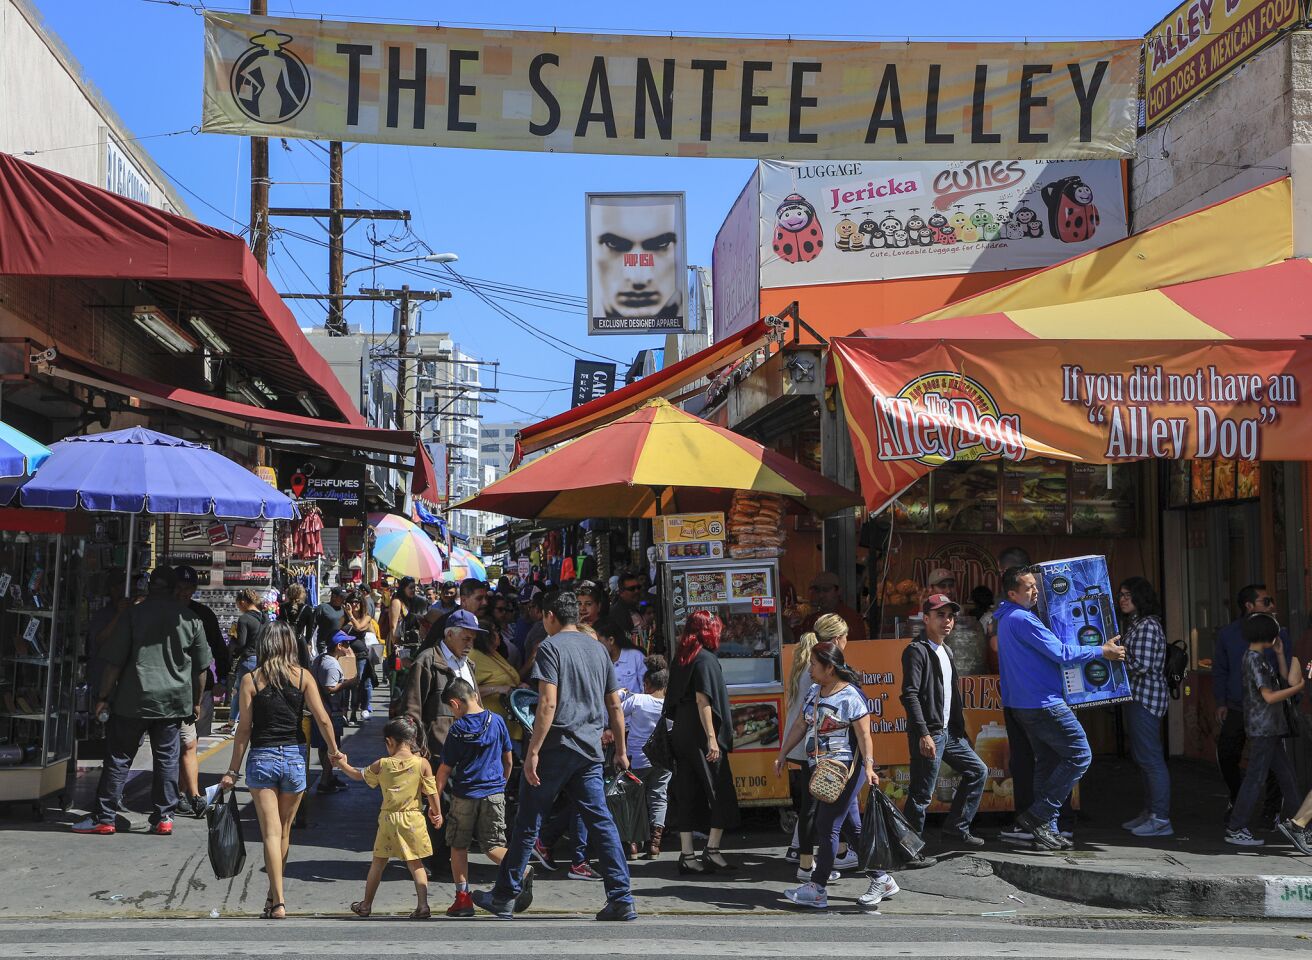 LOS ANGELES ,CA., MARCH 30 2019: What to do for four hours in Los Angeles? The list has to include a stroll through the colorful and chaotic Santee Alley shopping district. Santee Alley stretches from Santee Street to Maple Avenue and 12th -to-Olympic Blvd and includes over 150 stores selling clothing, shoes, sunglasses, wigs, prom dresses and more (Mark Boster For the LA Times).